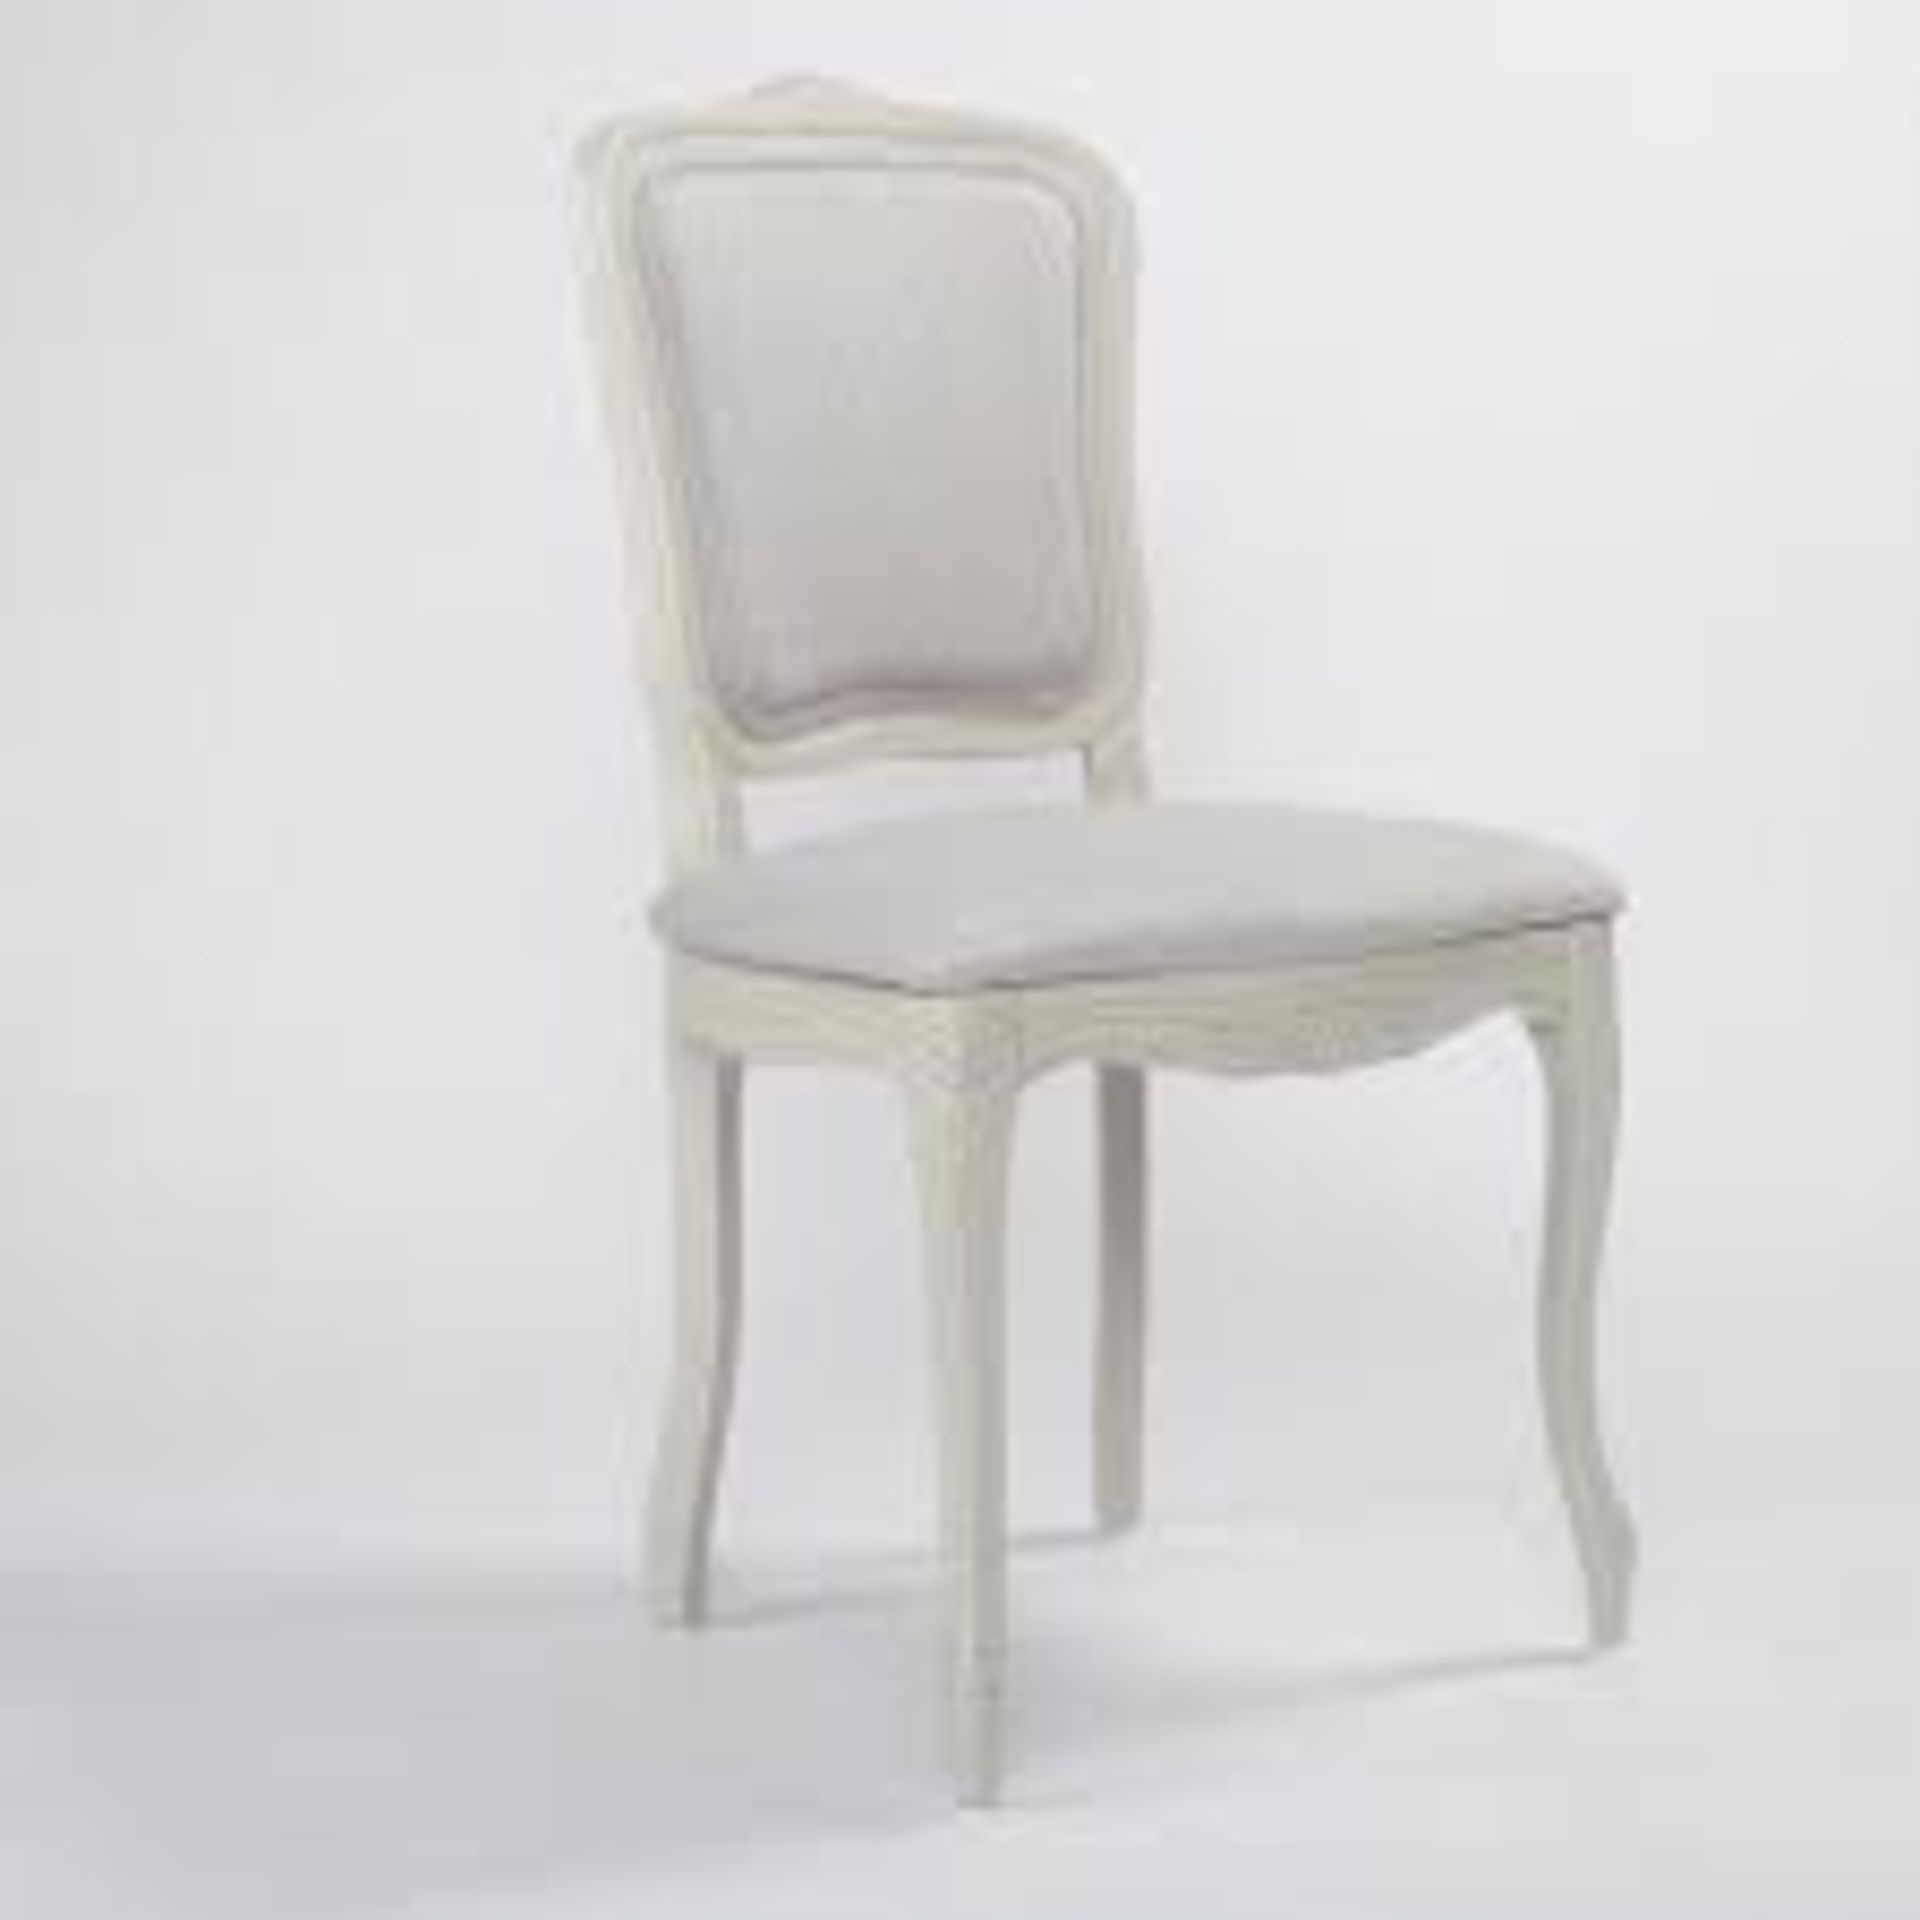 RRP £250 Unboxed Whittier Upholstered Dining Chair In Cream/Grey(Cr1)